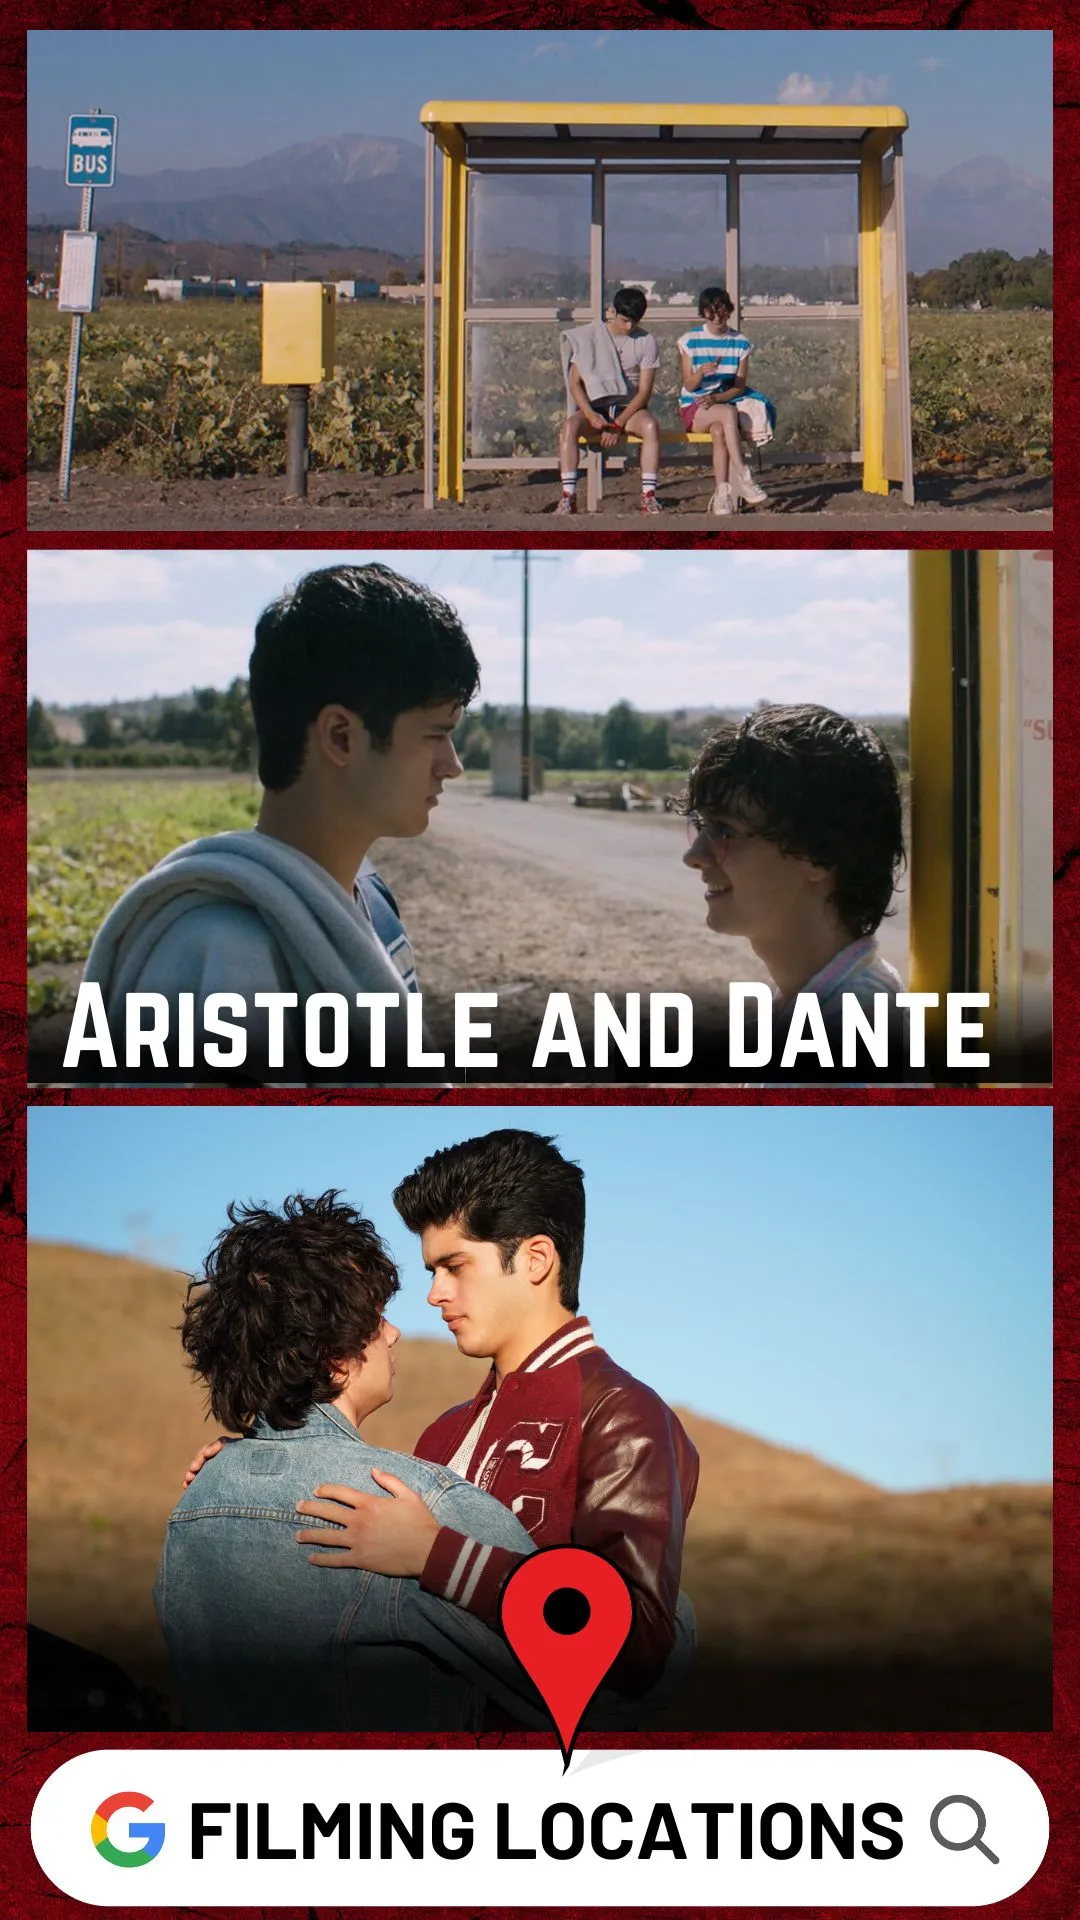 Aristotle and Dante Filming Locations